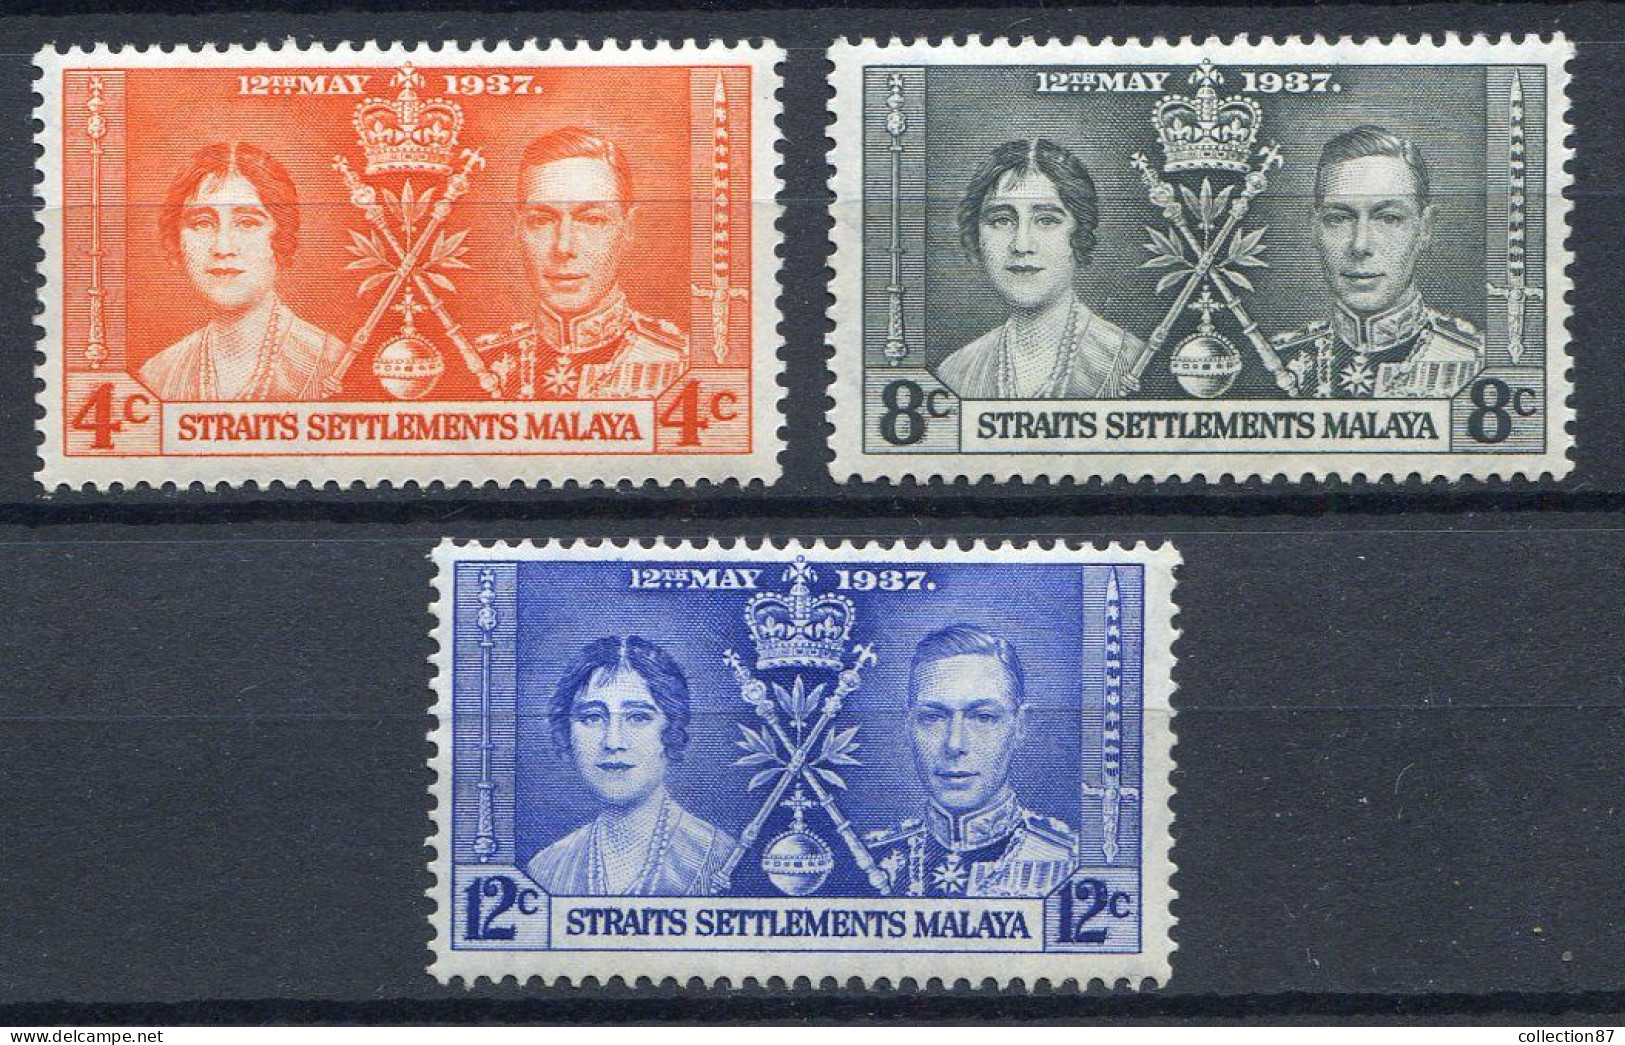 MALACCA < Yv. N° 220 à 222 * Neuf Ch - MH * - COURONNEMENT GEORGES VI - Malacca